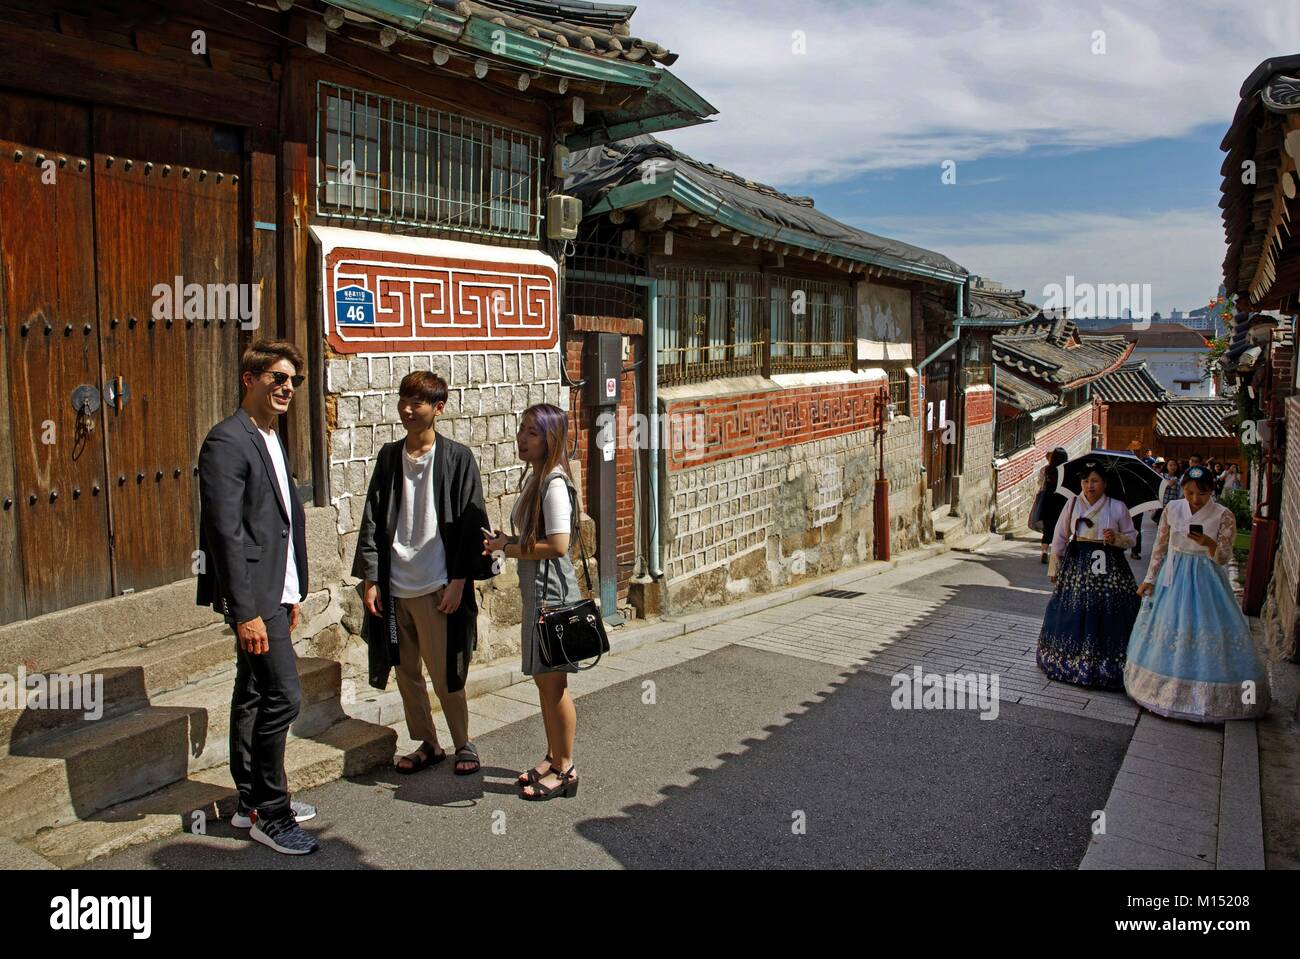 South Korea, Seoul, Fabien Yoon, french star of korean medias withs groupies in an alley of the old district Bukchon hanok village Stock Photo